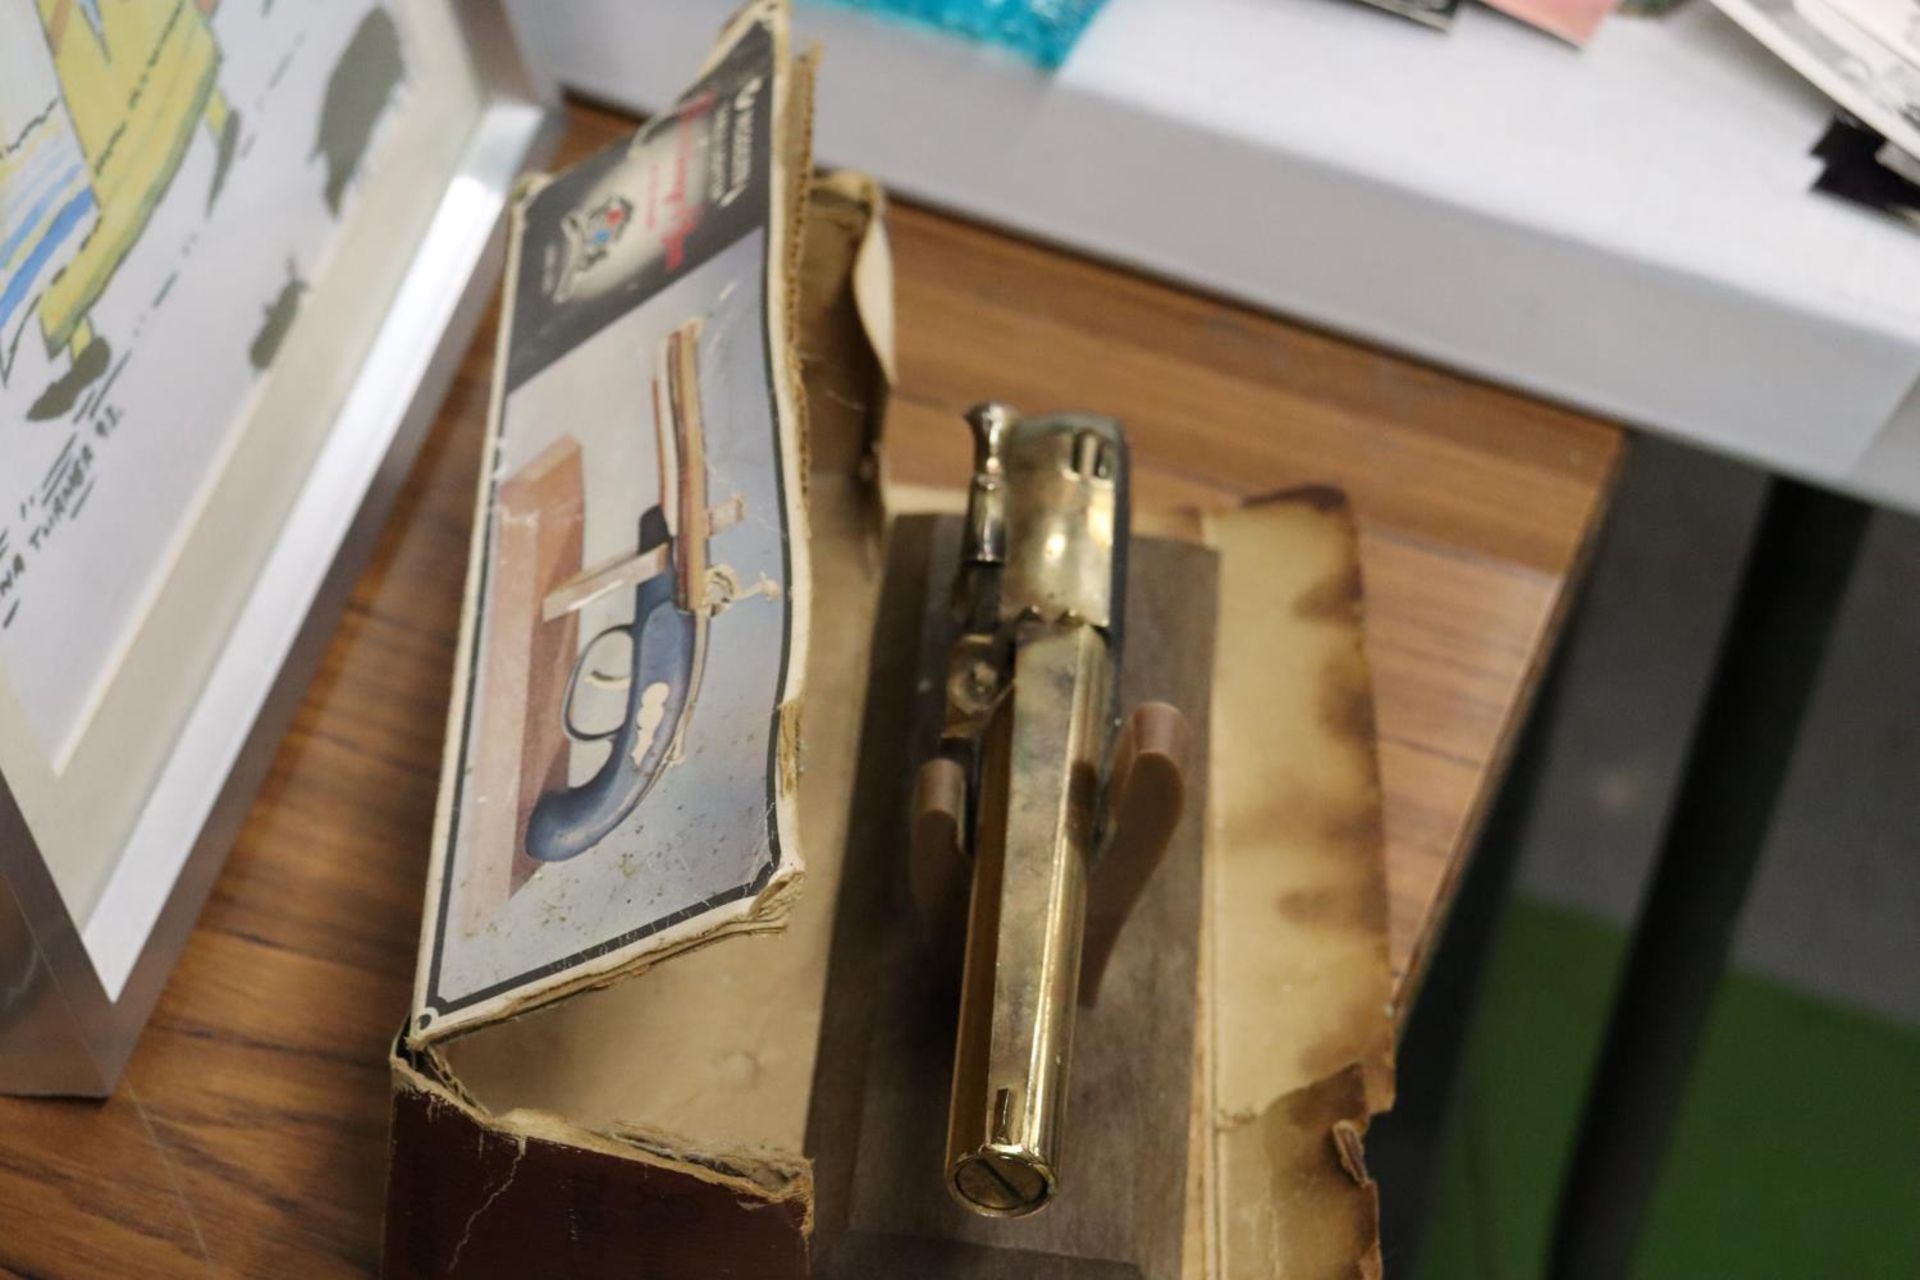 A DERRINGER GUN TABLE LIGHTER WITH STAND - Image 2 of 4